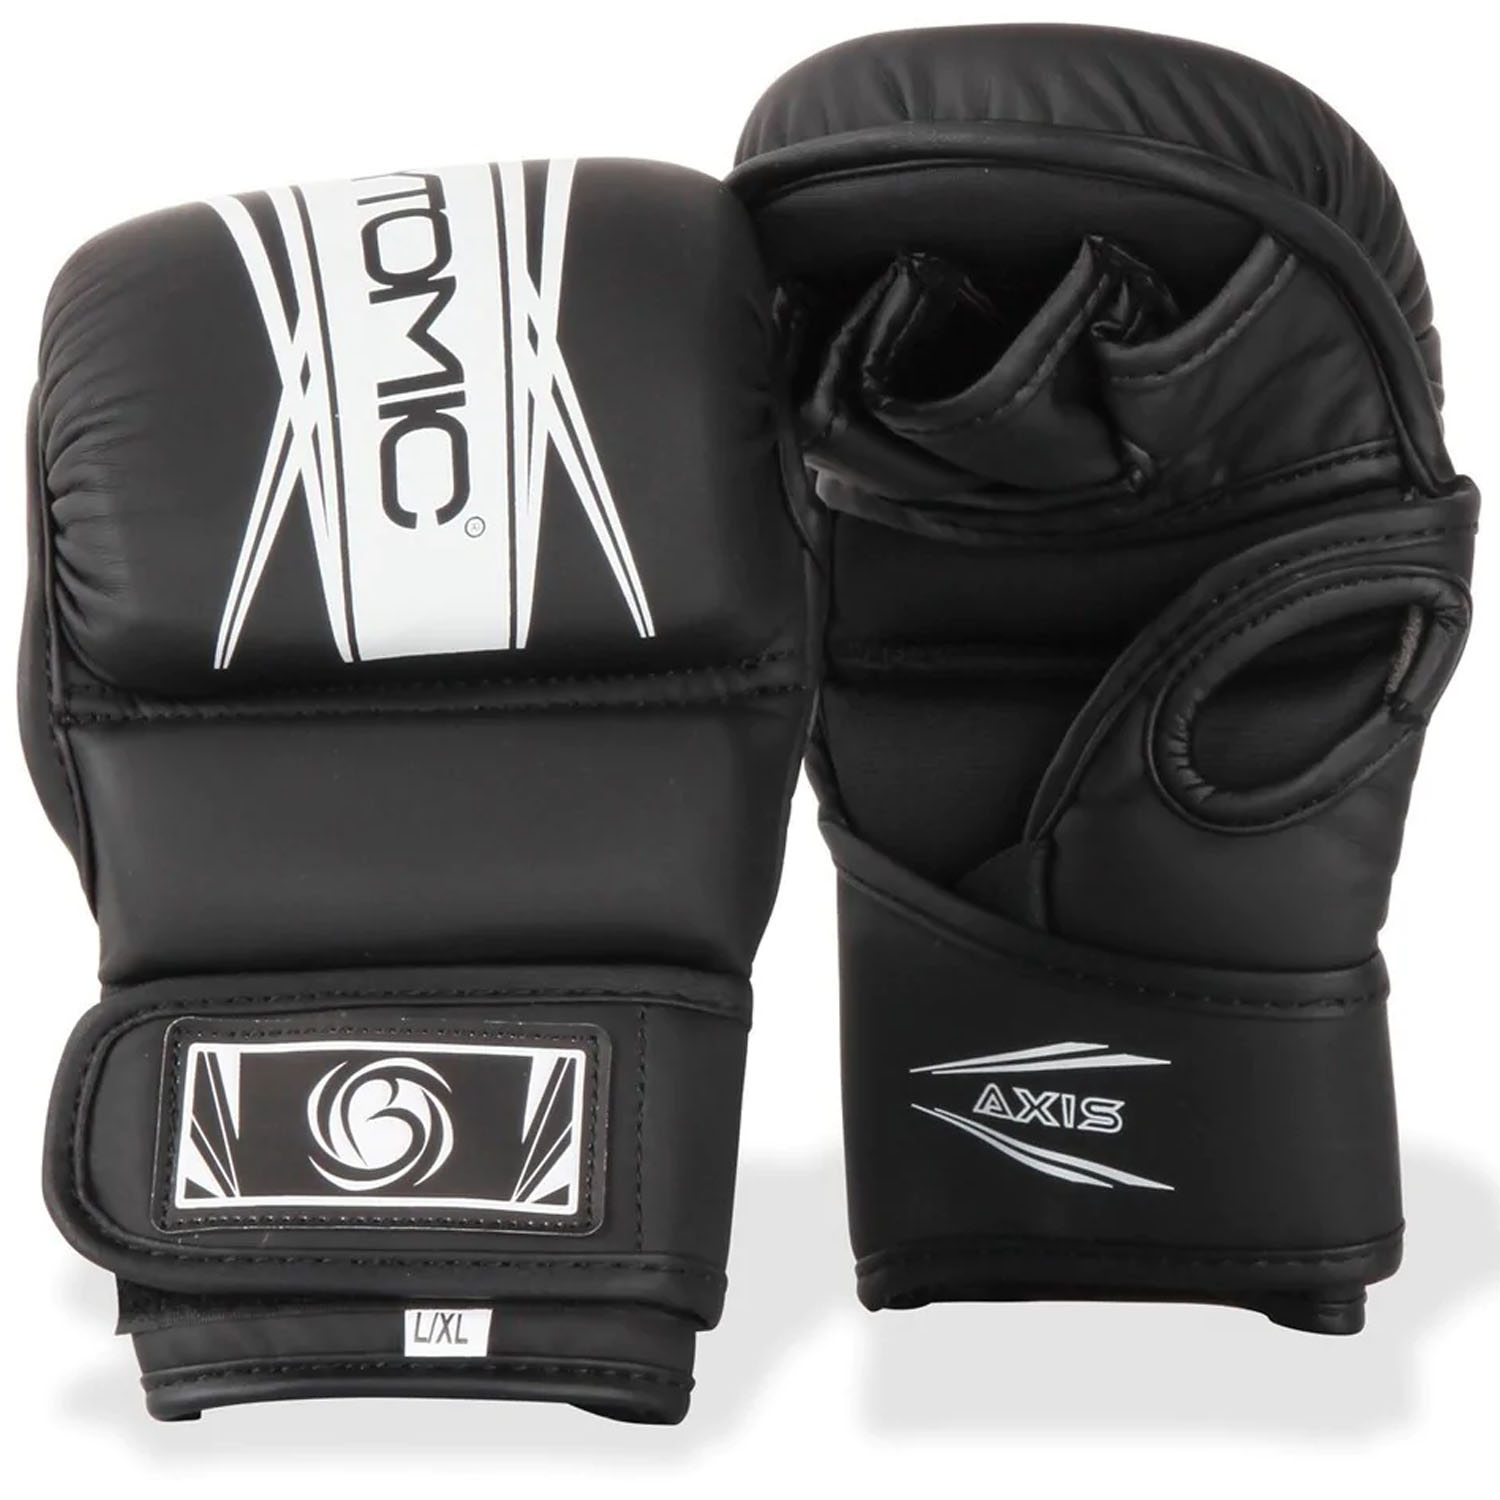 Bytomic MMA Sparring Boxing Gloves, Axis, V2, black-white, L/XL